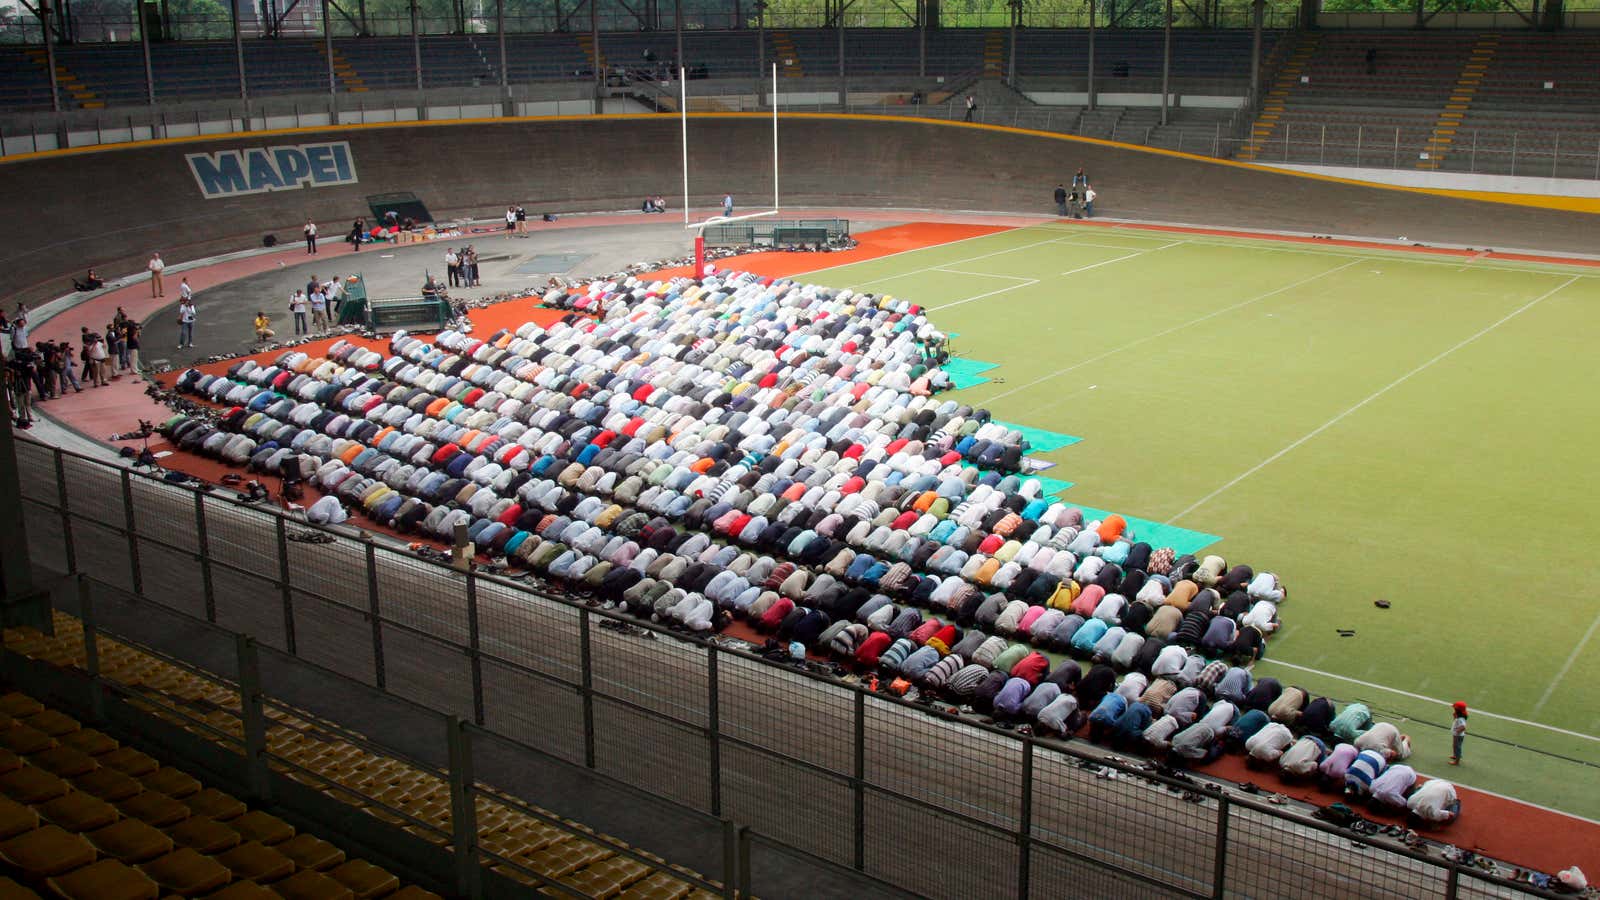 Friday prayer of muslim community in Milan’s velodrome in 2008 after the local mosque was closed.